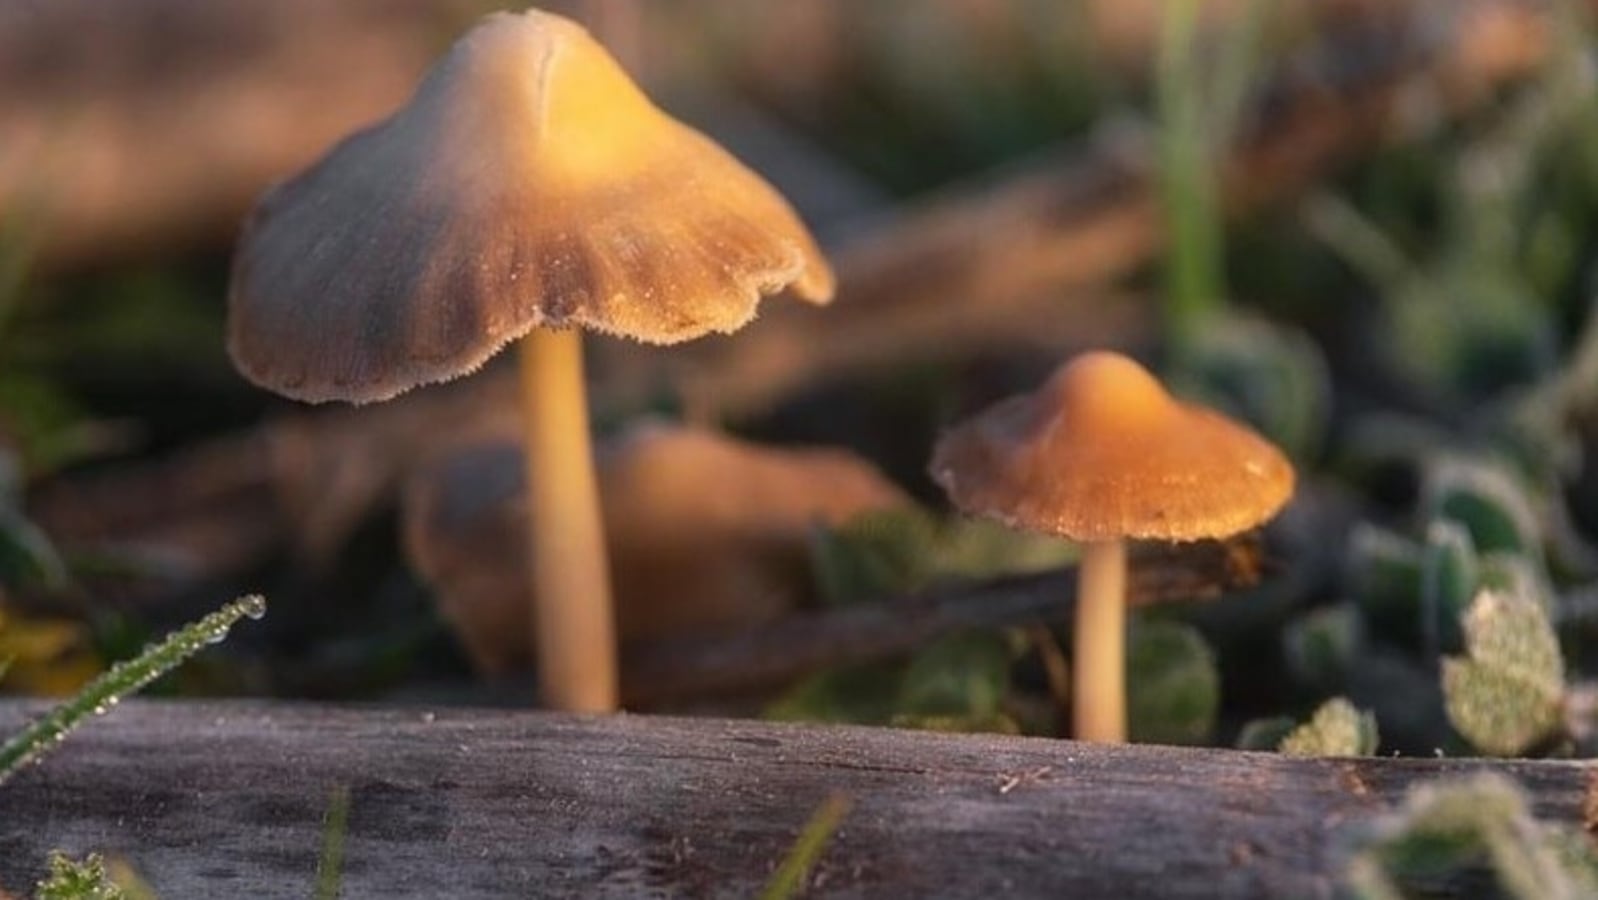 single-dose-of-magic-mushrooms-helps-treat-depression-in-some-shows-trial